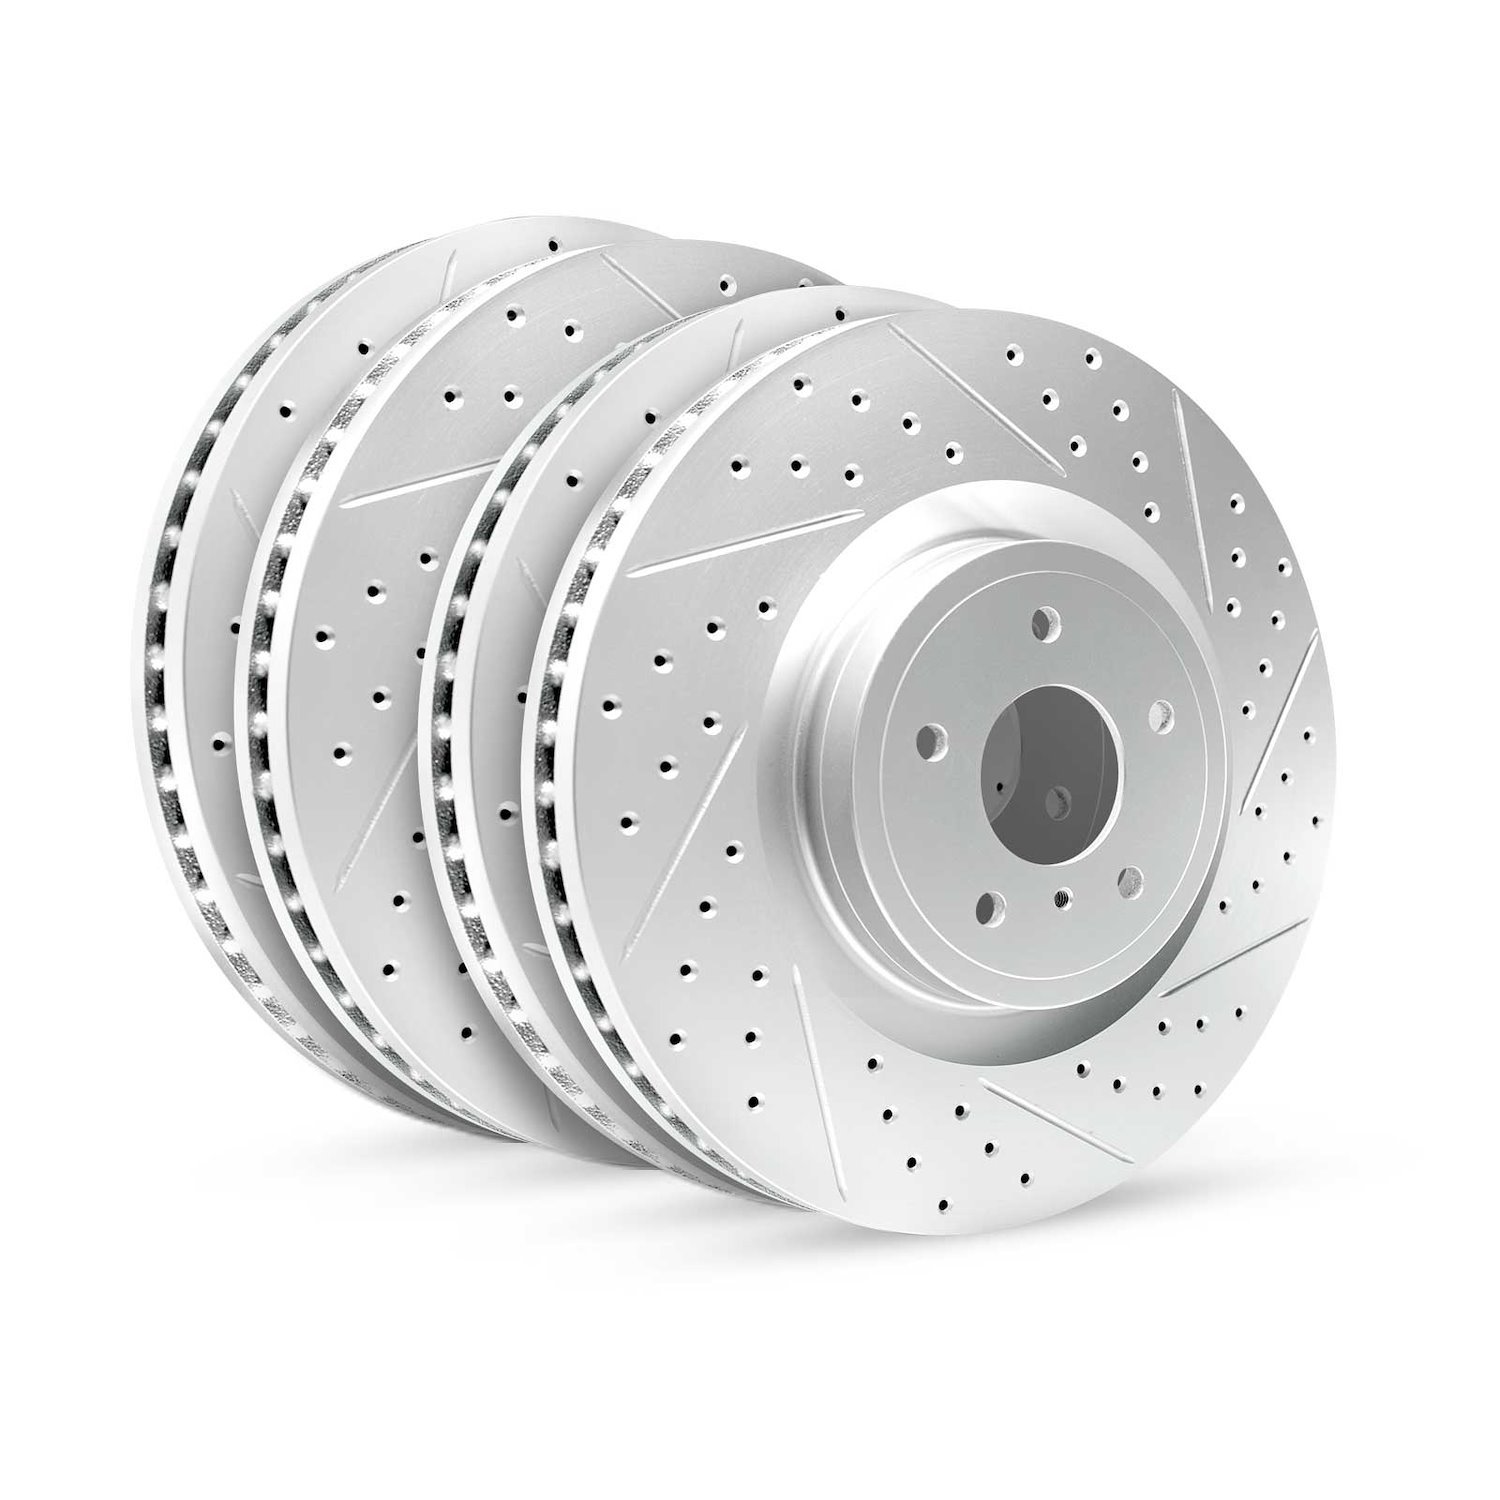 GEO-Carbon Drilled/Slotted Rotors, 1997-2004 Ford/Mazda, Position: Front/Rear